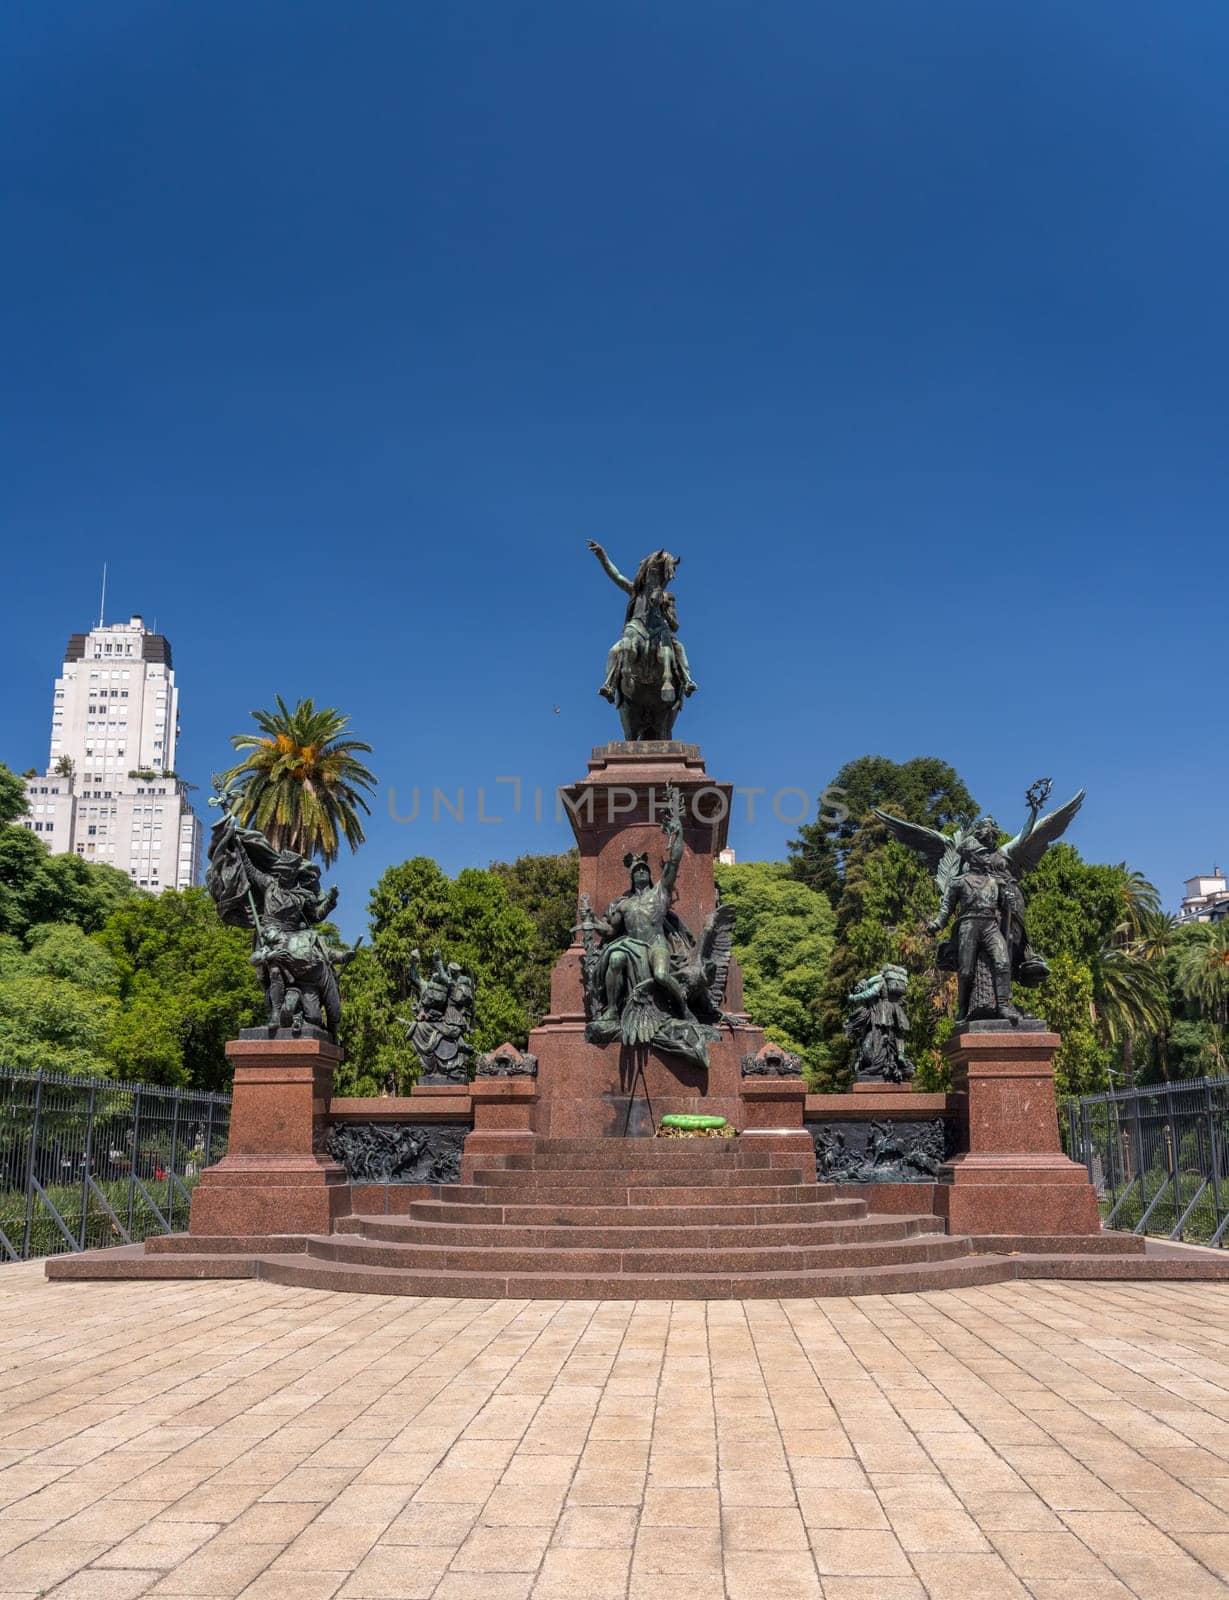 General Jose de San Martin equestrian statue in Buenos Aires Argentina by steheap